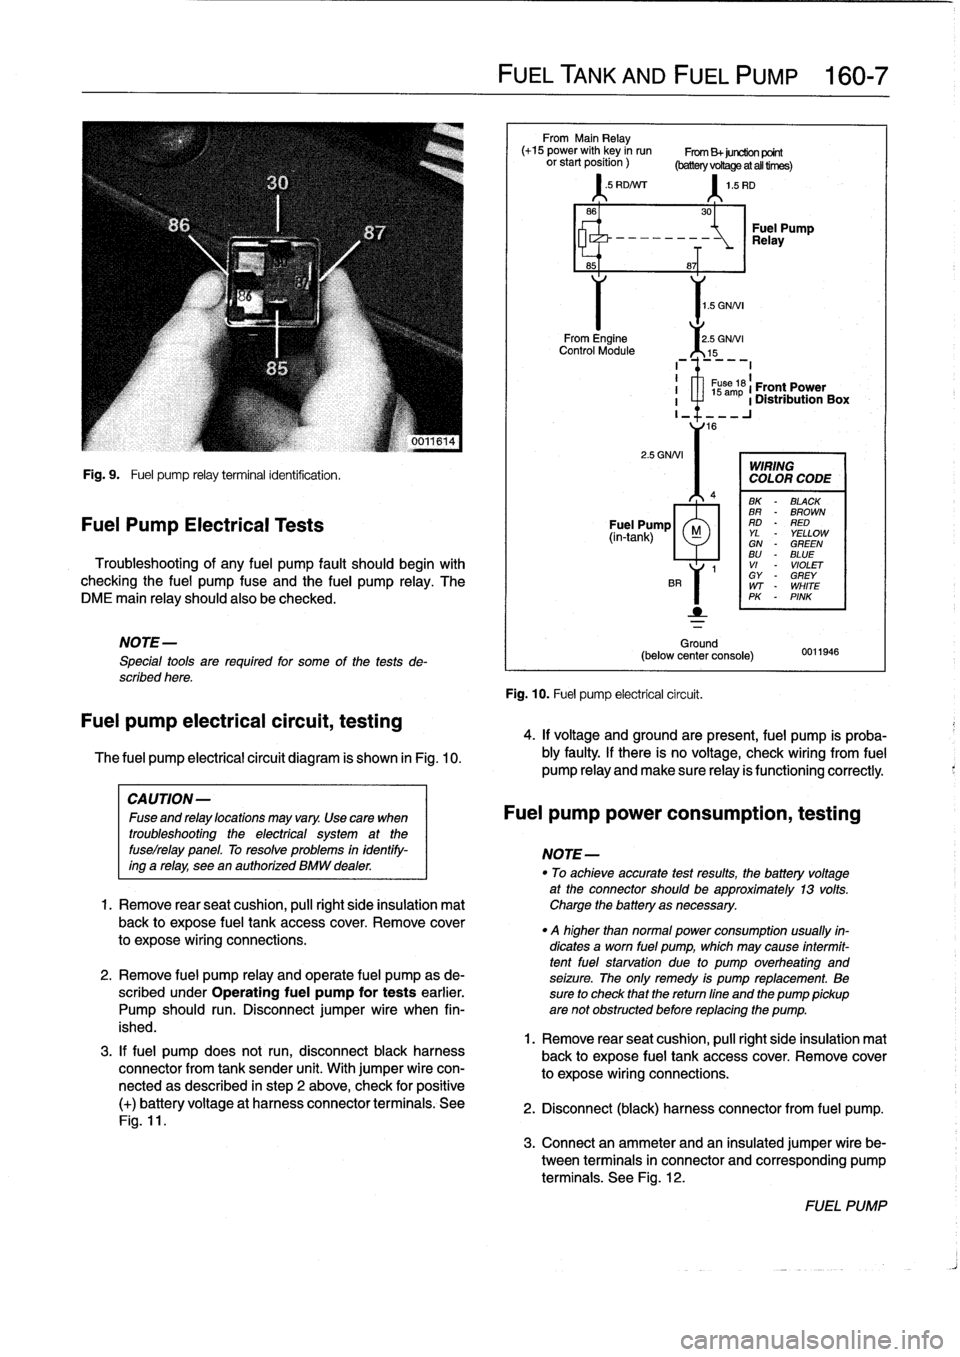 BMW 328i 1995 E36 Workshop Manual 
Fig
.
9
.

	

Fuel
pump
relay
terminal
identification
.

Fuel
Pump
Electrical
Tests

Troubleshooting
of
any
fuel
pump
fault
should
begin
with

checking
the
fuel
pump
fuse
and
the
fuel
pump
relay
.
Th